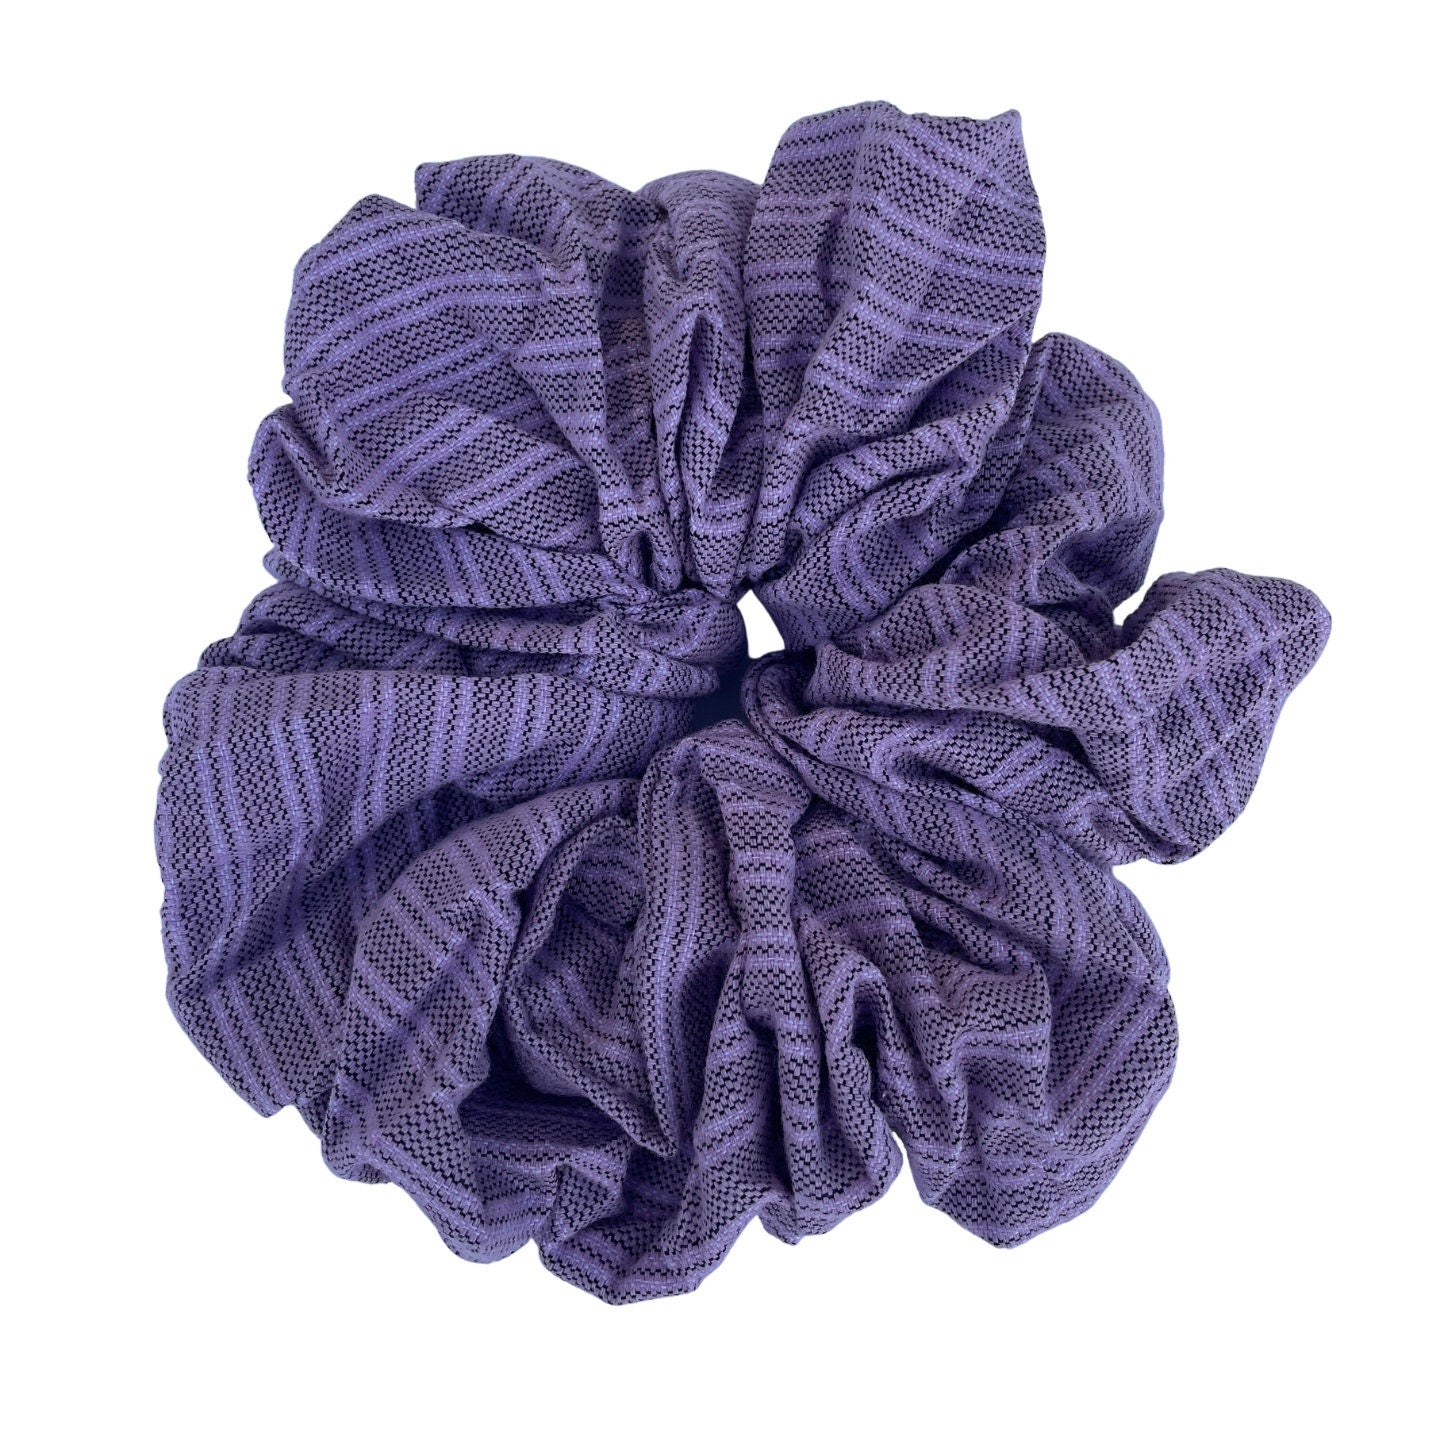 XXL Scrunchie Hair Tie, Oversized Aesthetic Hair Accessory, Stocking Bohemian Gift, Lilac